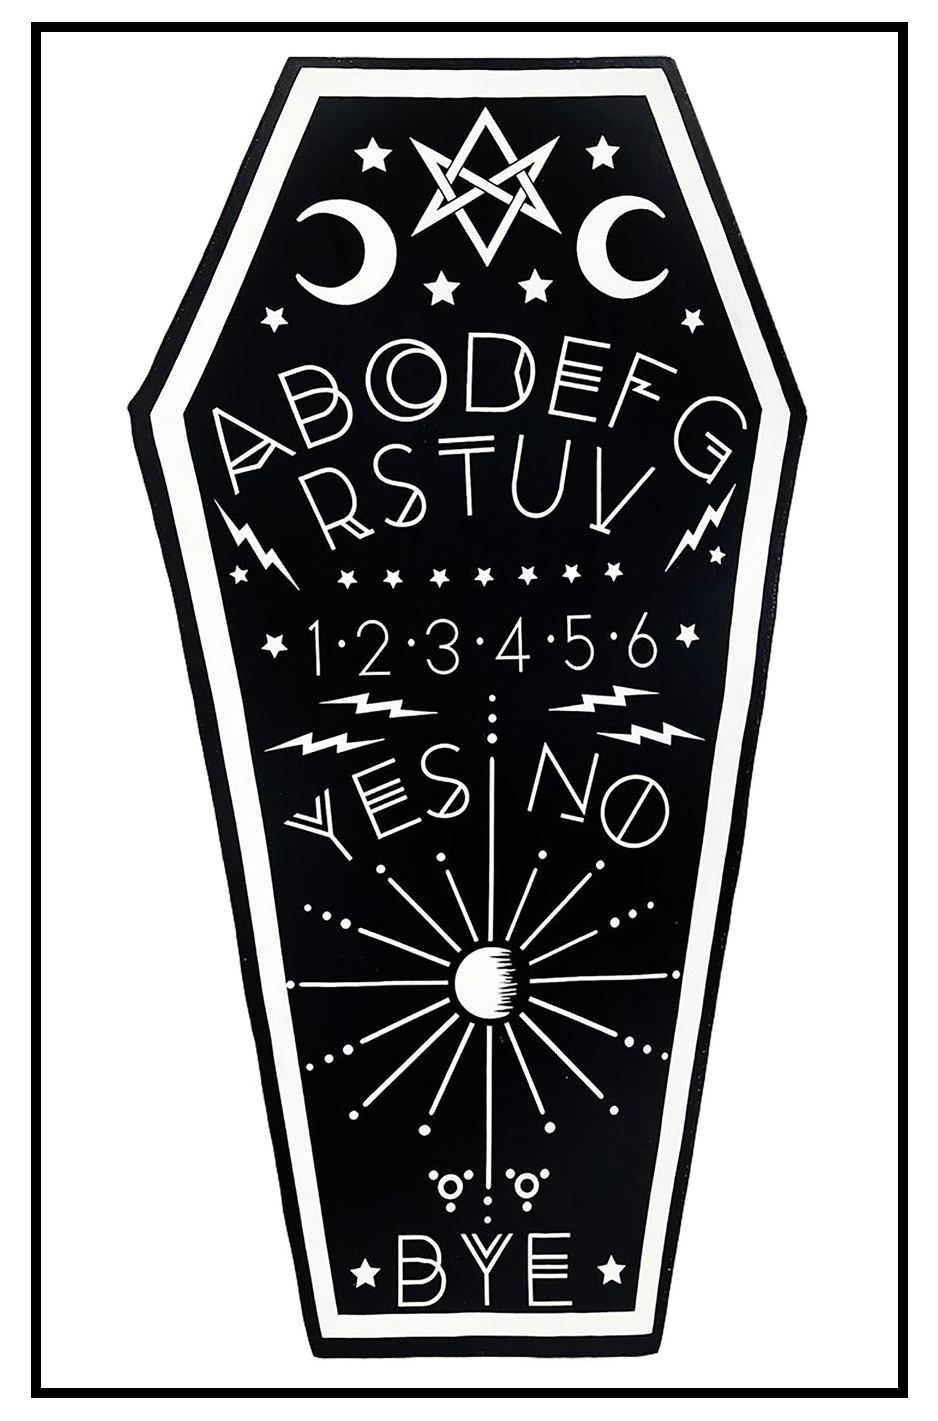 25 Must Have Summer Accessories for Goths at the Beach | Ouija Board Coffin Beach Towel | Rat Baby | Gothic | Occult | Swim Noir | www.MeandAnnabelLee.com